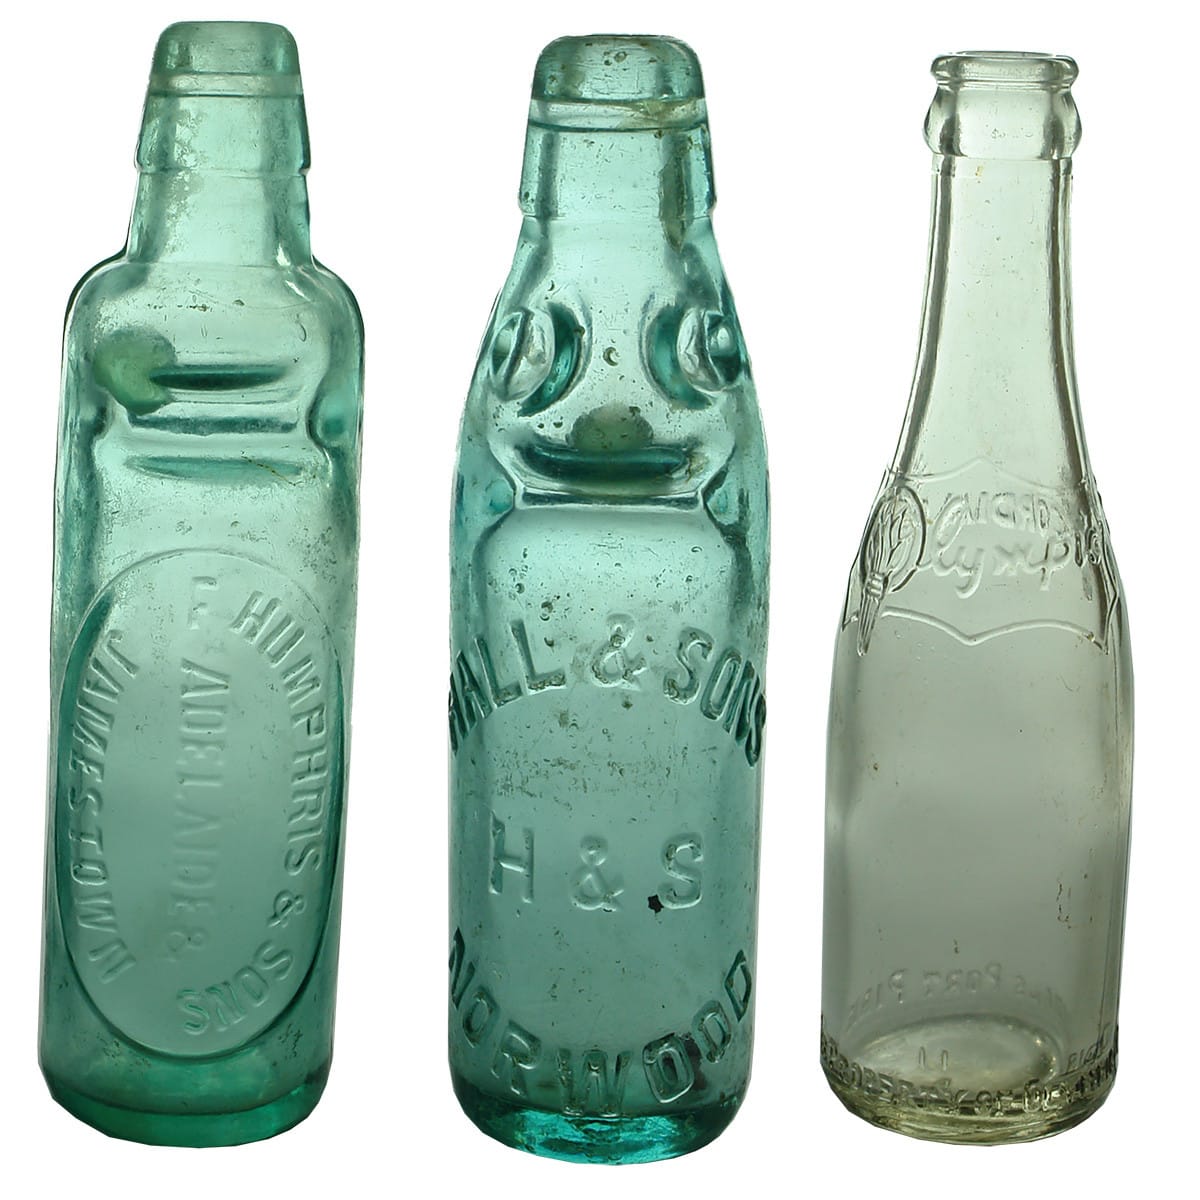 3 SA Aerated Waters: Humphris, Adelaide Codd; Hall & Sons Norwood Codd; Olympic Cordials Crown Seal. (South Australia)